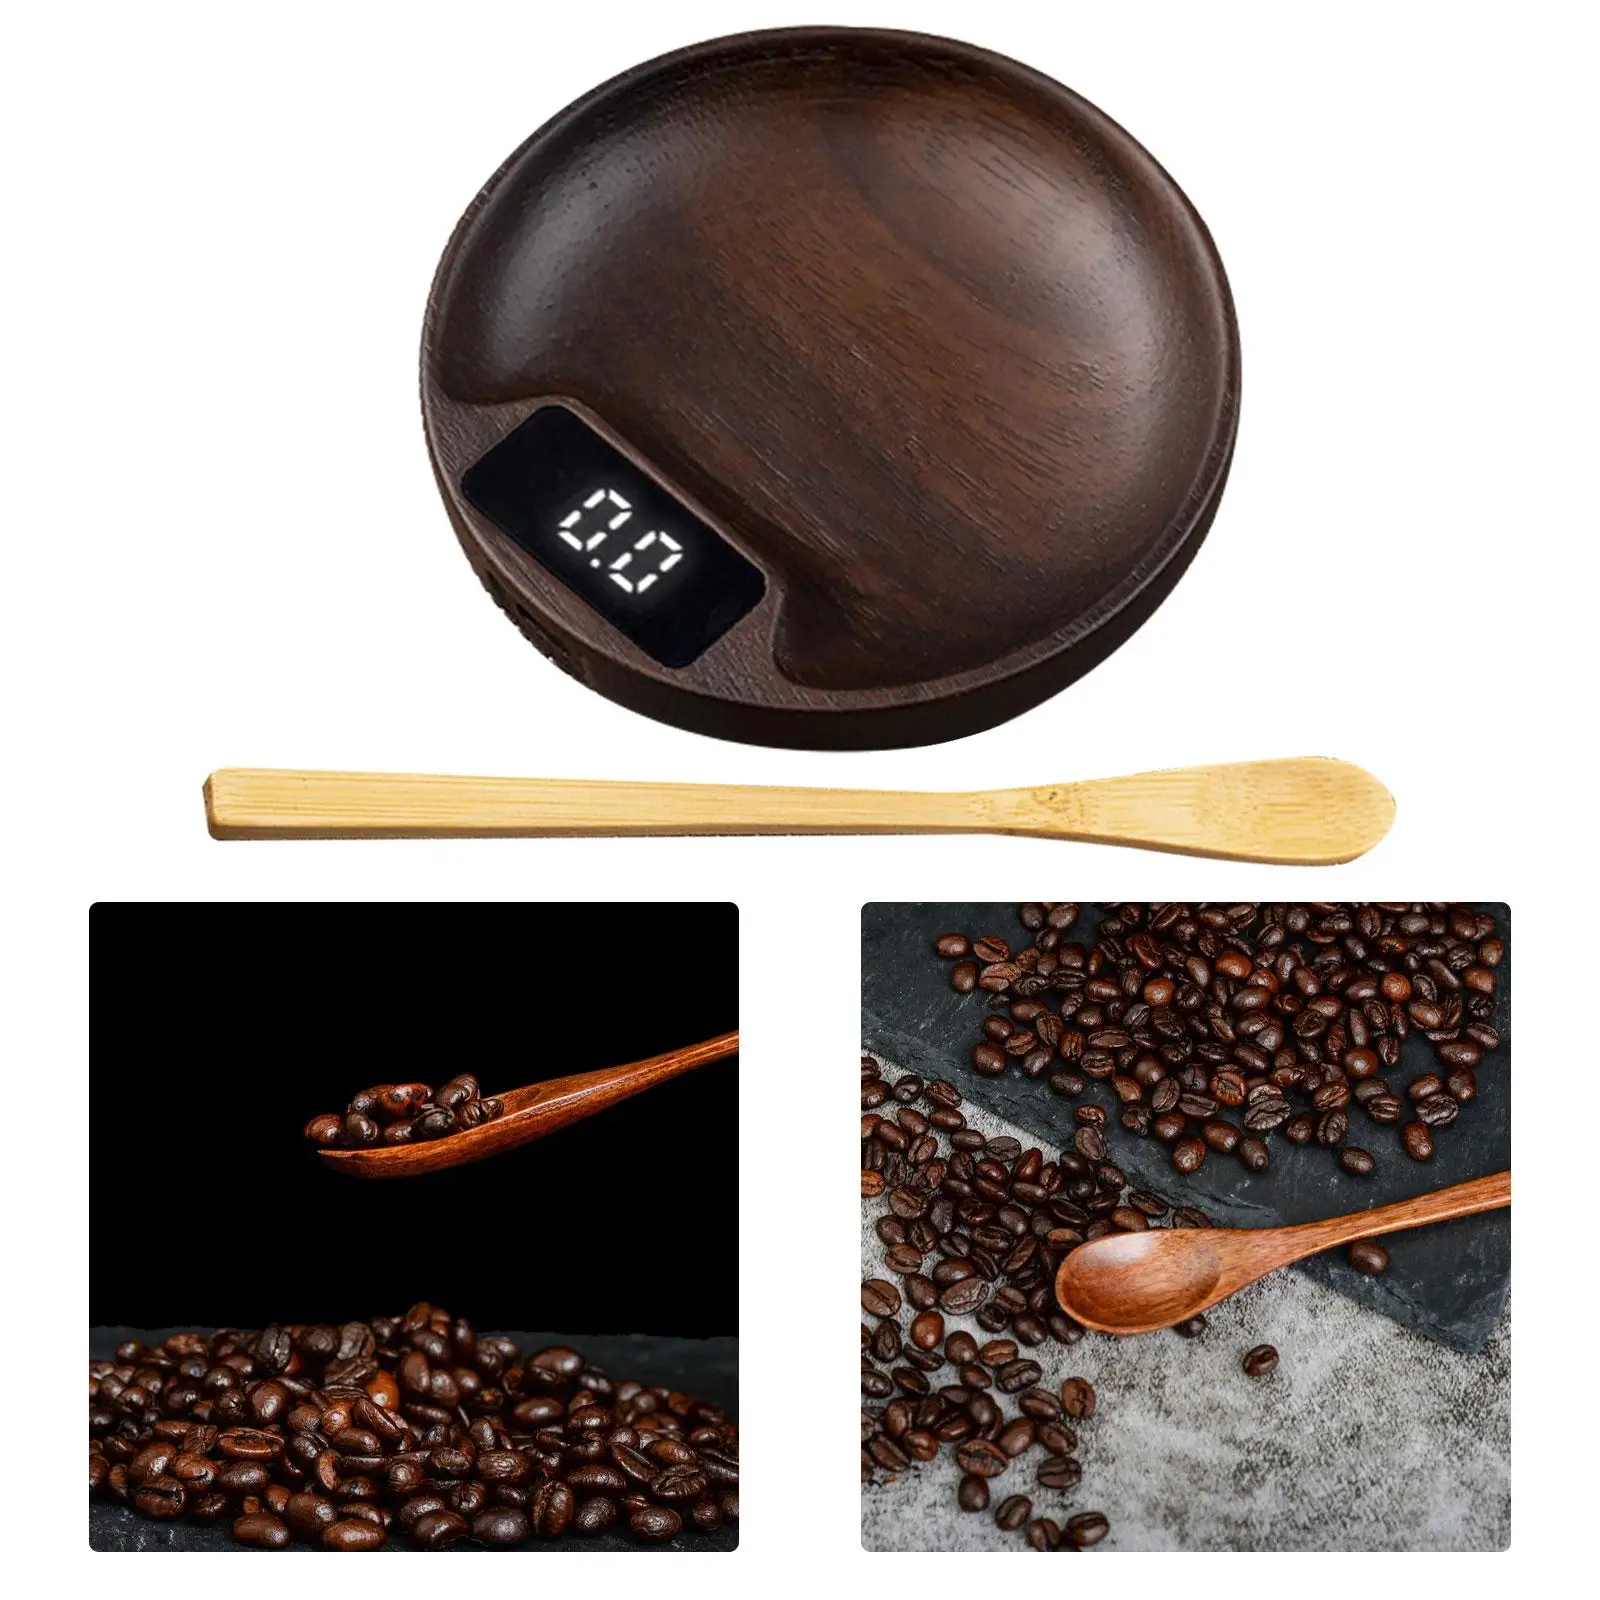 Wood Electronic Tea Scale Durable Jewelry Scale Birthday Gifts Rechargeable Sturdy Food Scale Digital Scale for Teahouse